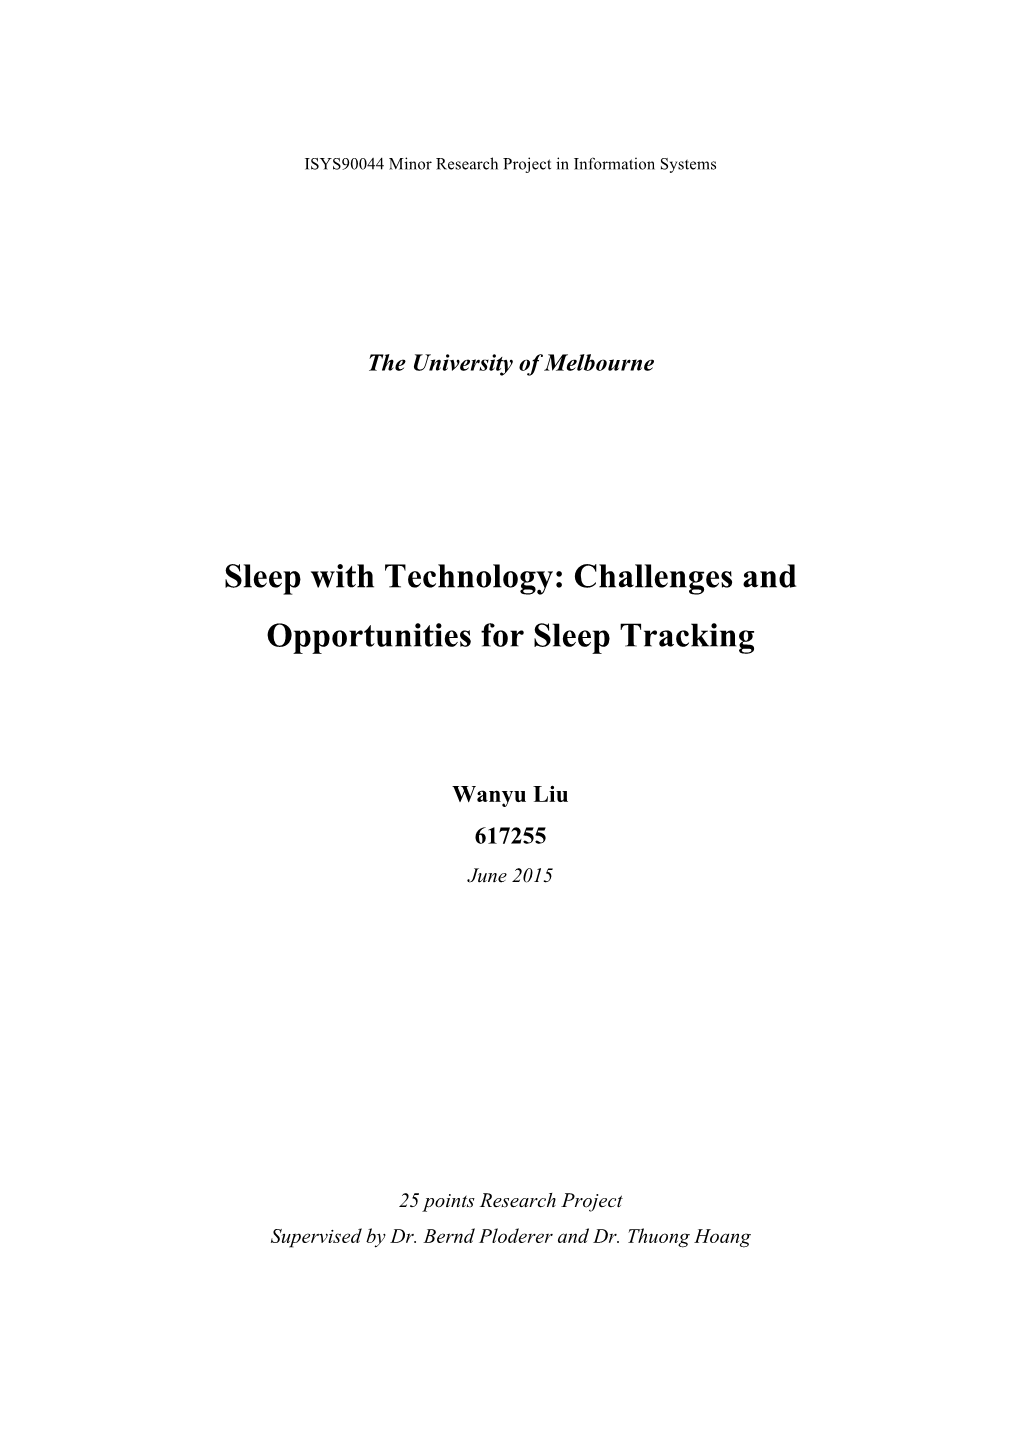 Challenges and Opportunities for Sleep Tracking